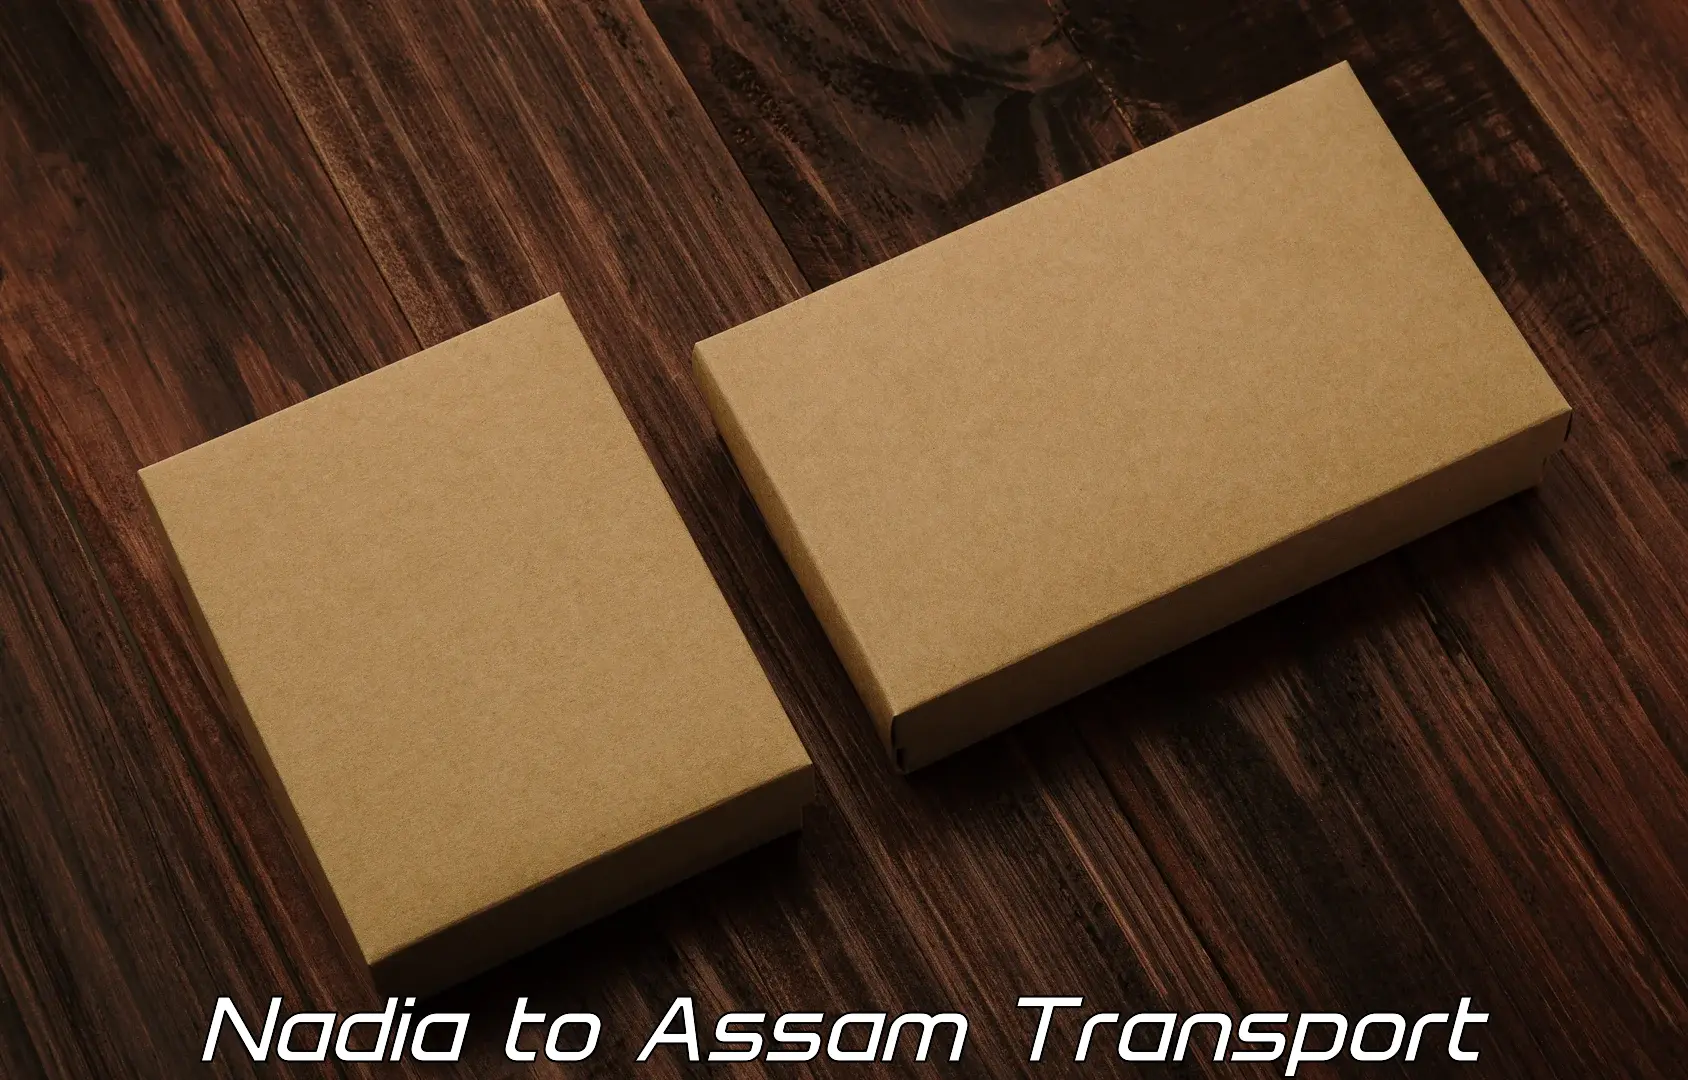 All India transport service Nadia to Assam